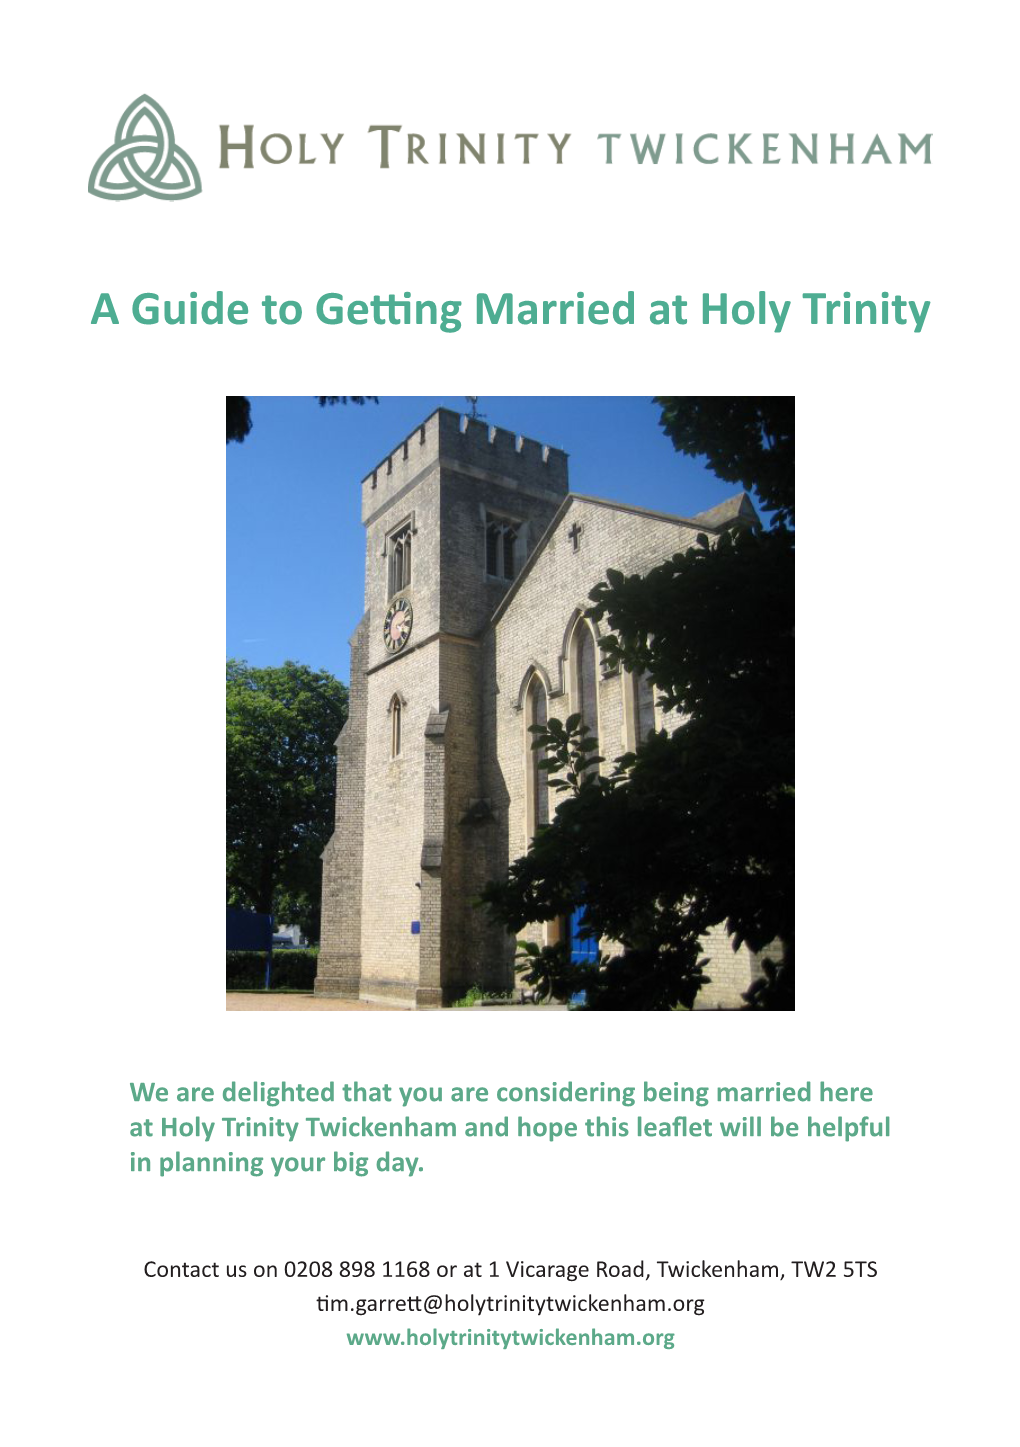 A Guide to Getting Married at Holy Trinity